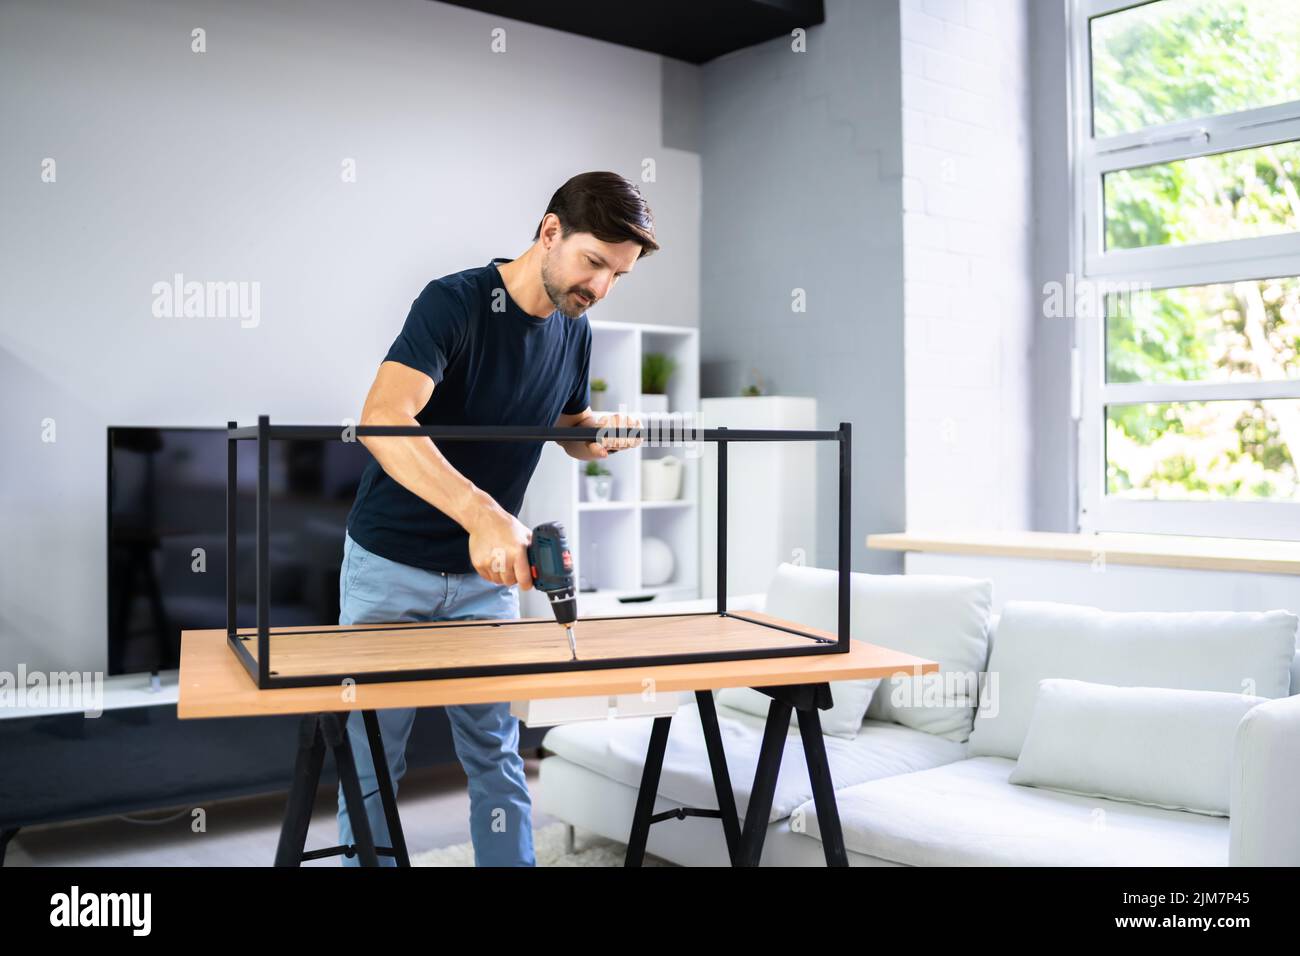 DIY Table Assembly In Domestic Apartment. Concentrated Carpenter Stock Photo